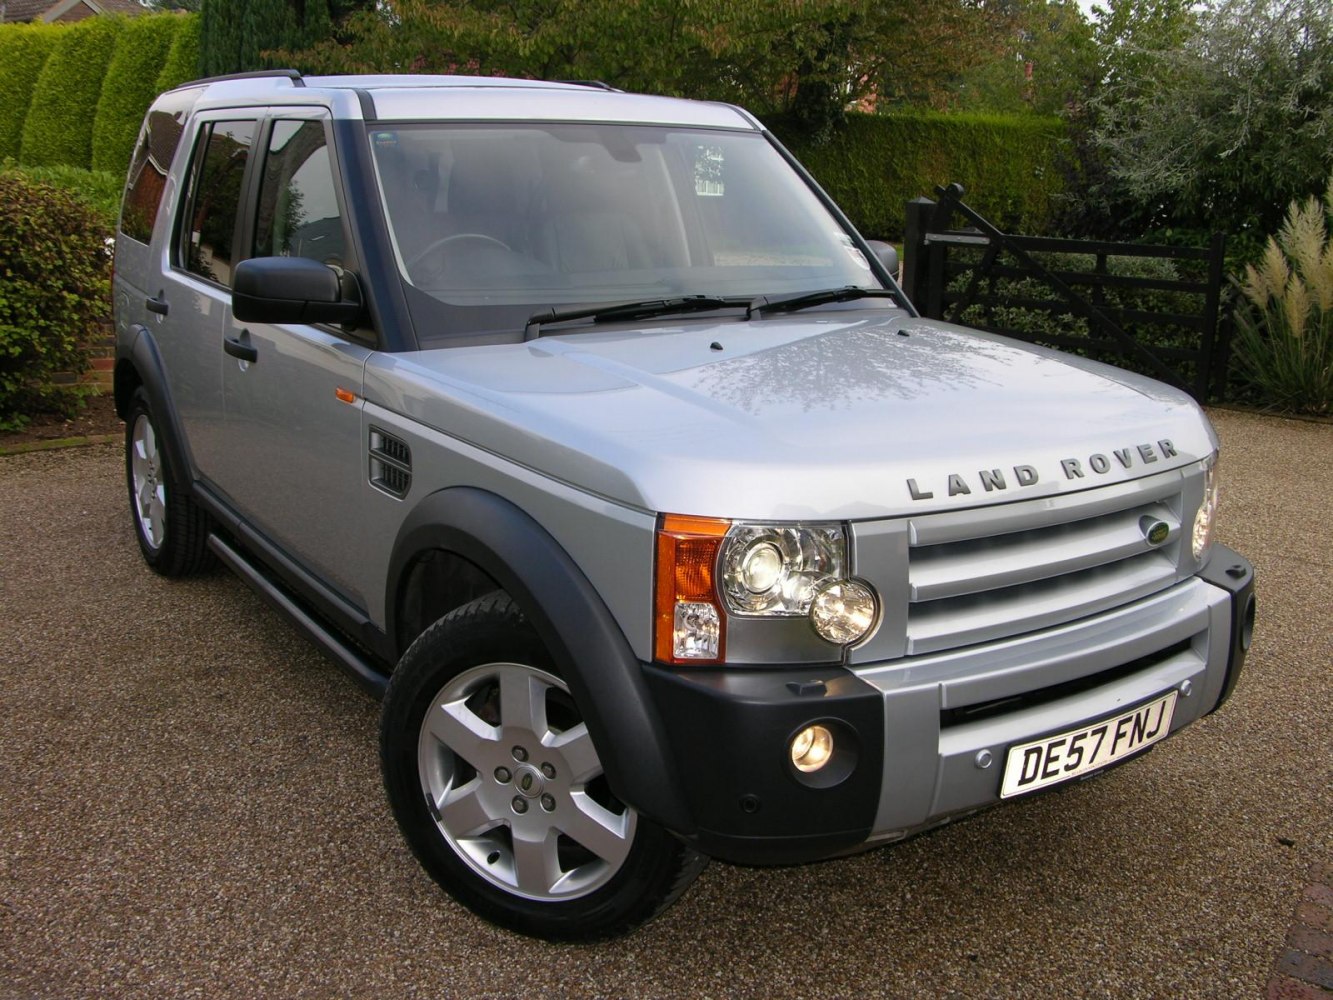 https://totalrenting.es/wp-content/uploads/2022/10/land-rover-discovery-iii-2004-2-7-tdi-190-cv-todoterreno-6.png